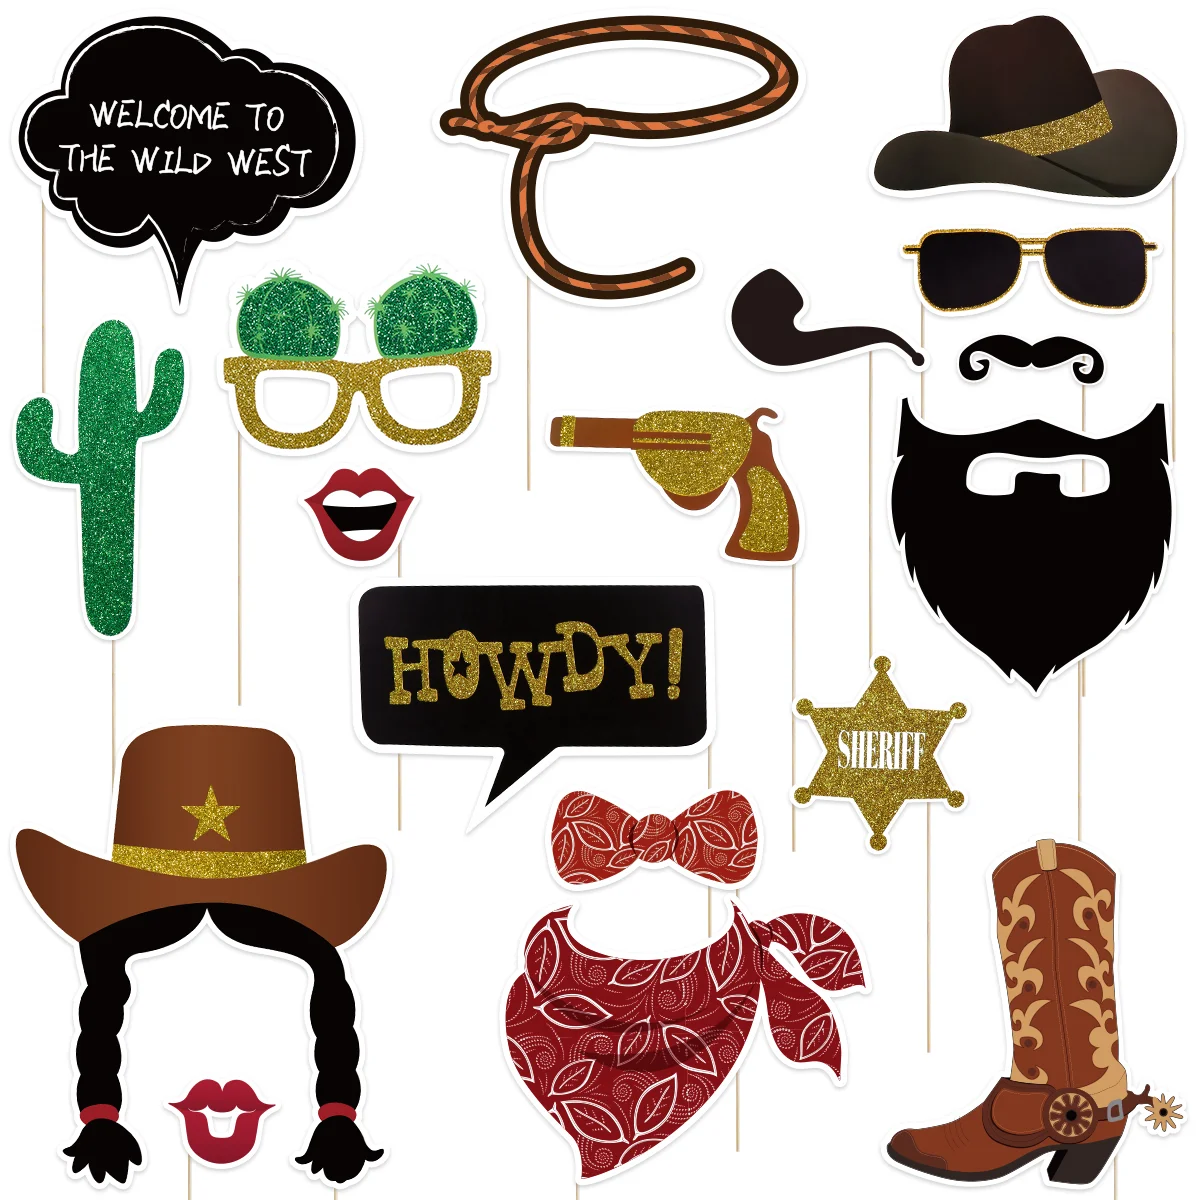 

18pcs Photo Accessory for Party Theme Party Photo Props West Cowboy Photo Frame West Cowboy Photo Booth Prop